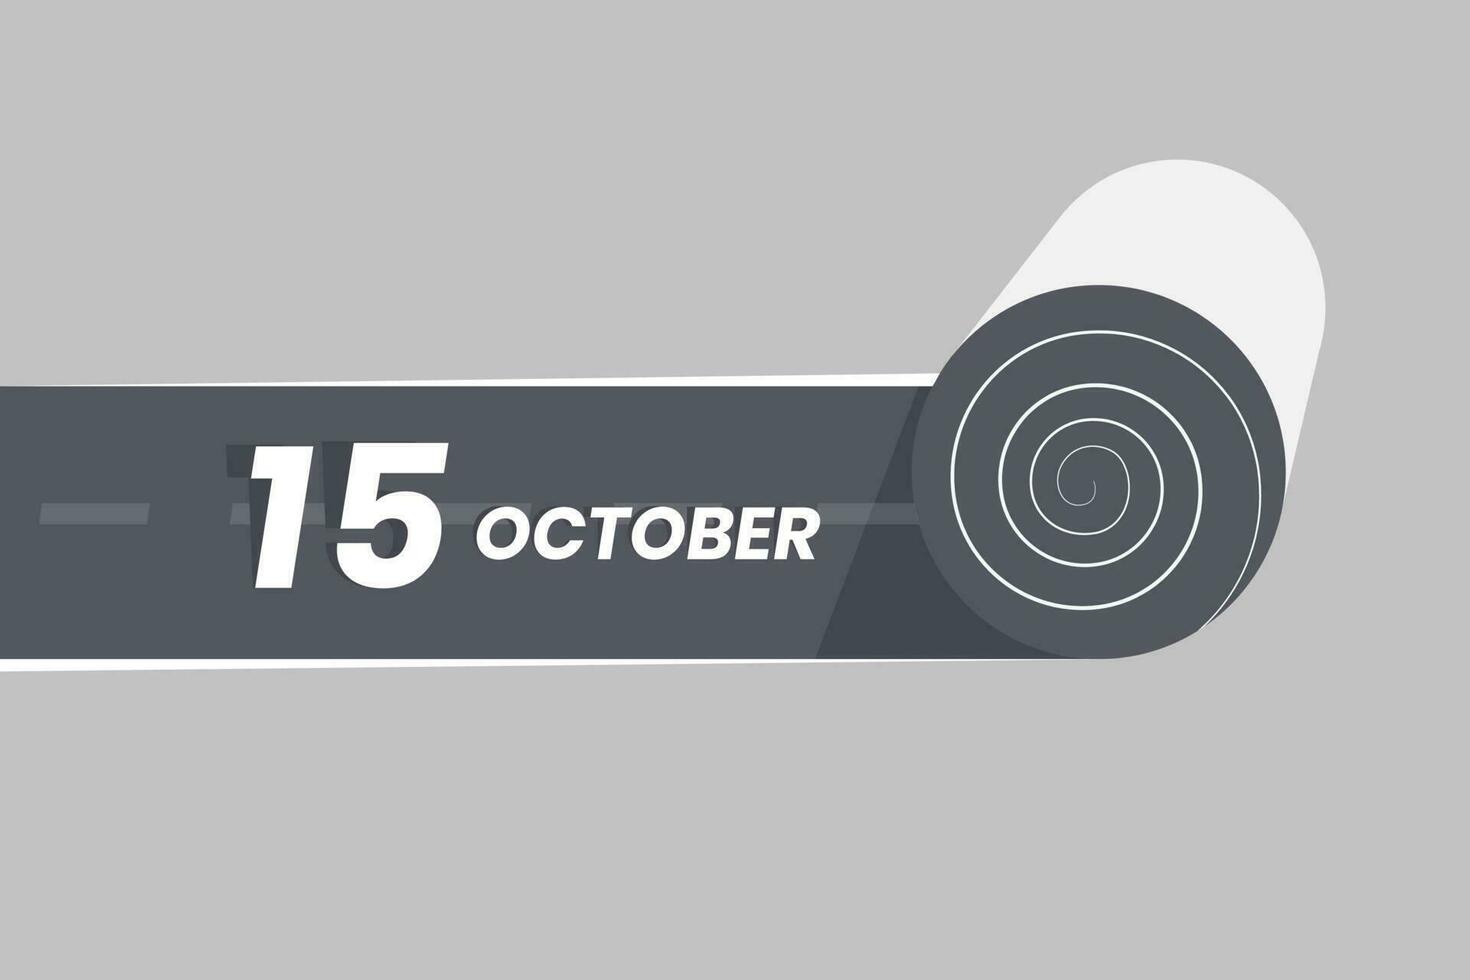 October 15 calendar icon rolling inside the road. 15 October Date Month icon vector illustrator.